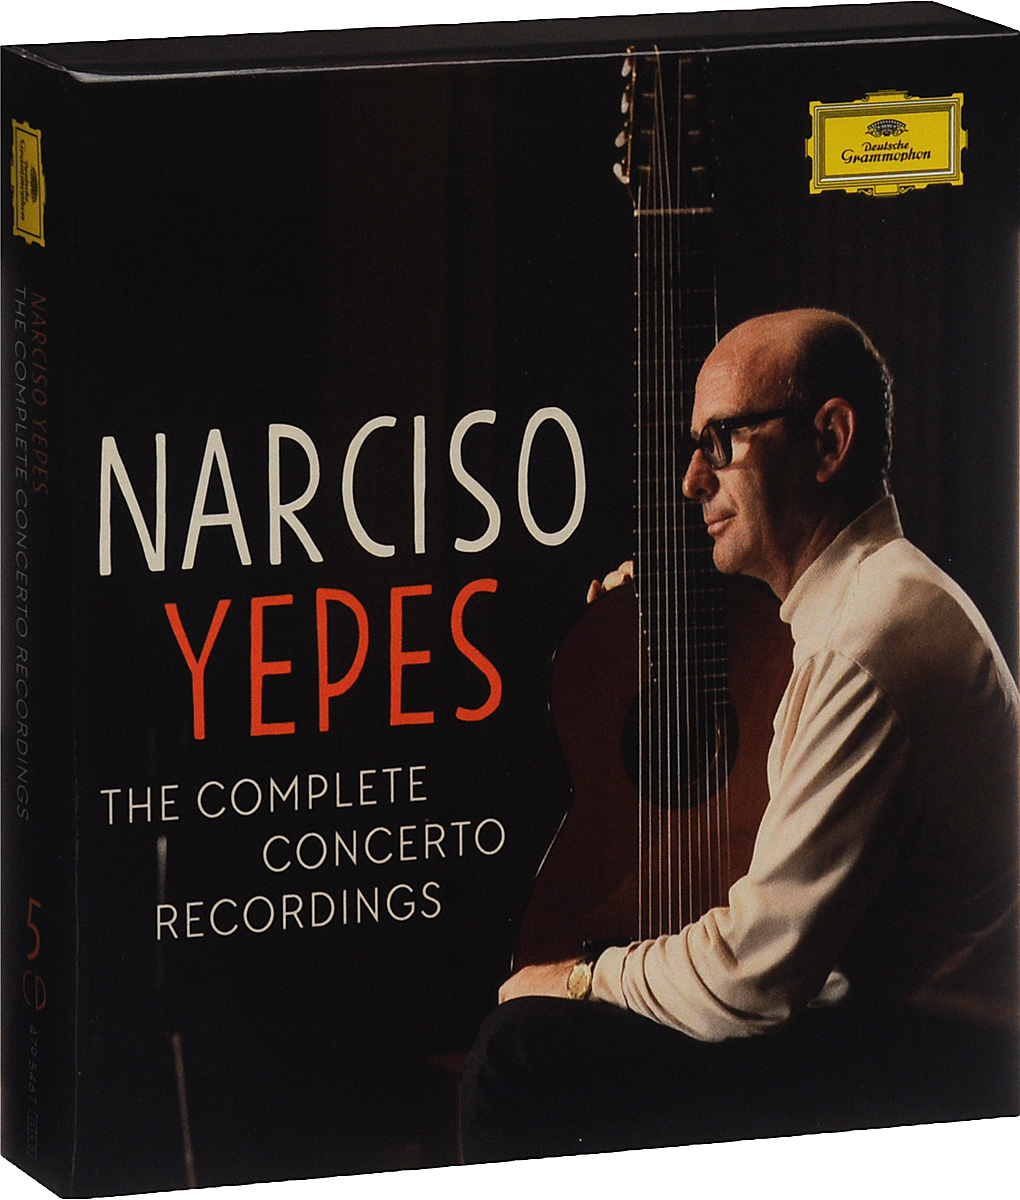 Narciso Yepes. The Complete Concerto Recordings (5 CD)